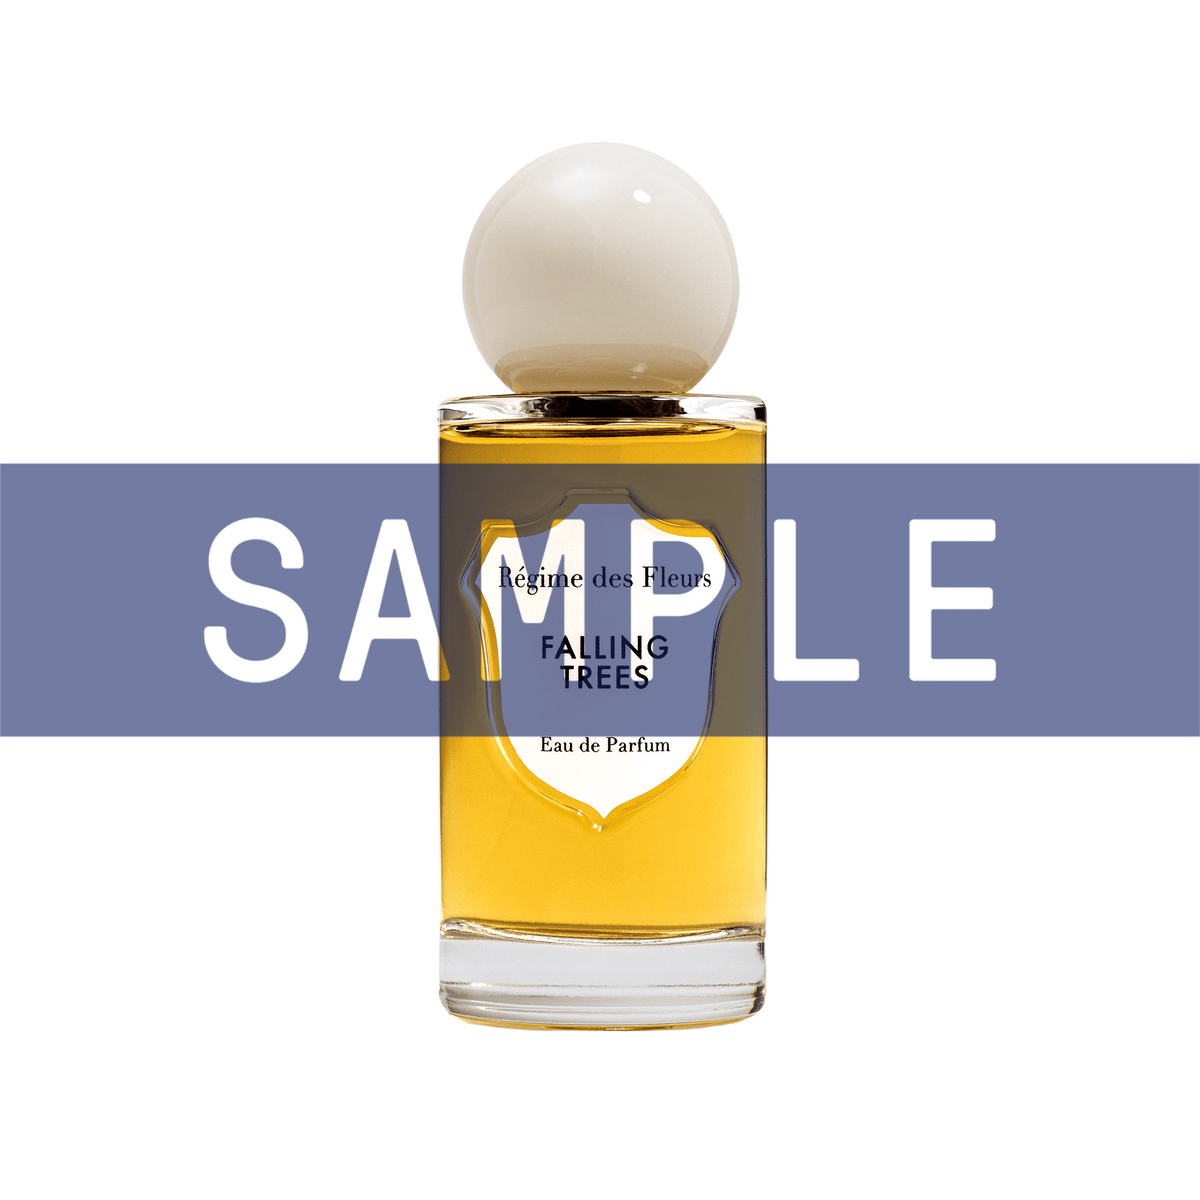 Primary Image of Sample - Falling Trees EDP